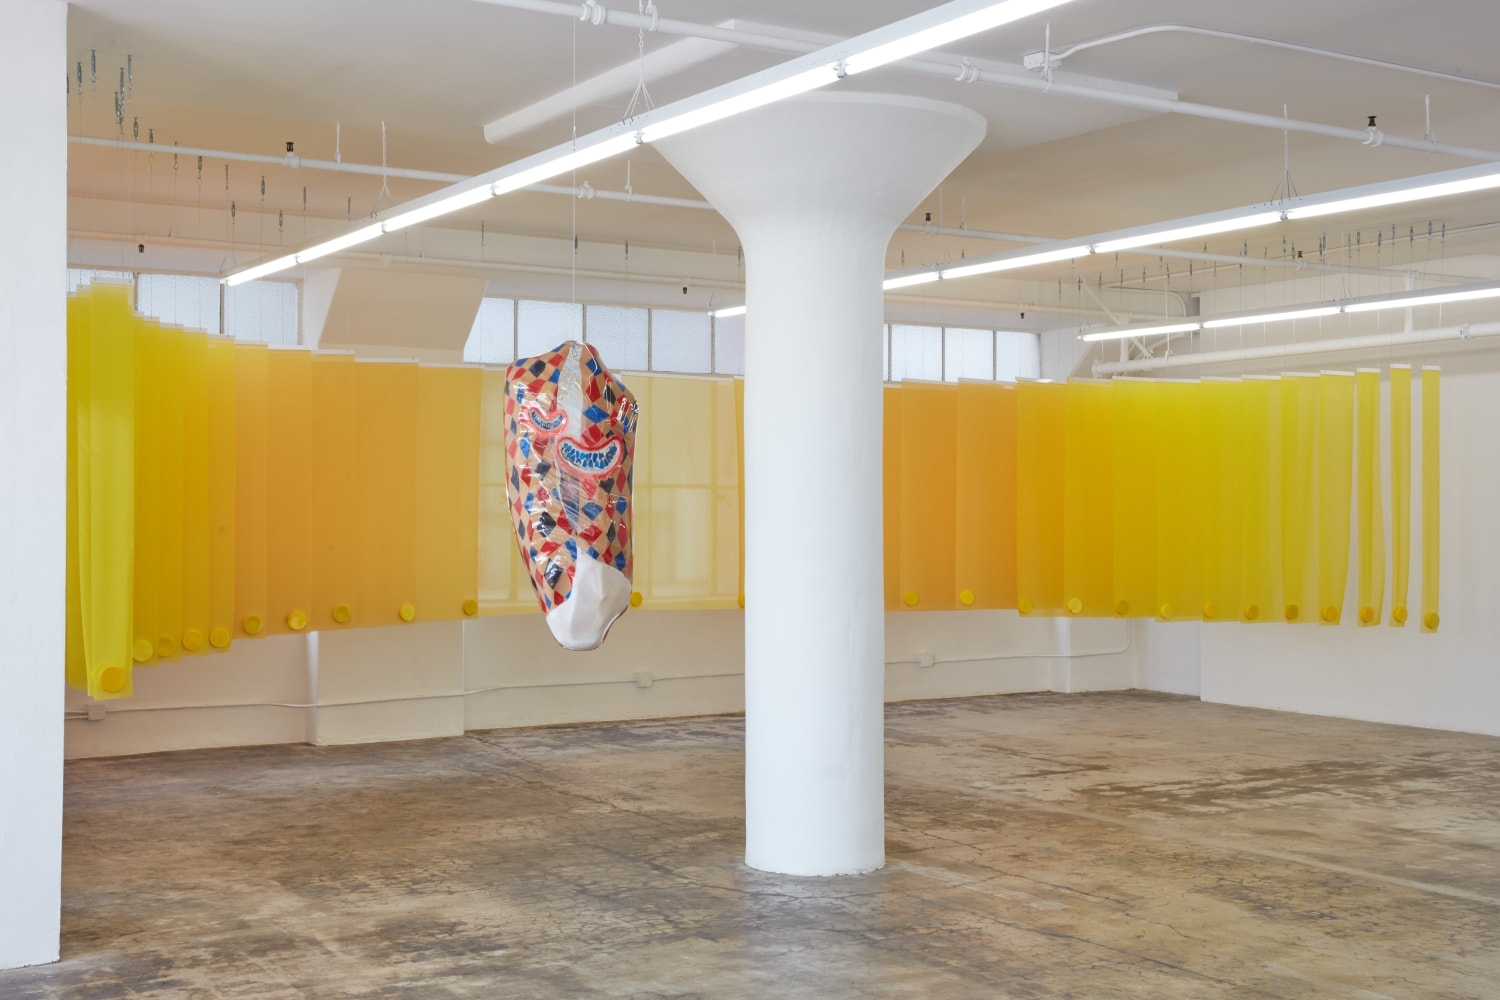 Spine: Madeline Hollander, Eva LeWitt, and Ragen Moss
Installation view at JOAN, Los Angeles
December 2, 2018 - February 3, 2019
Photo by Paul Salveson